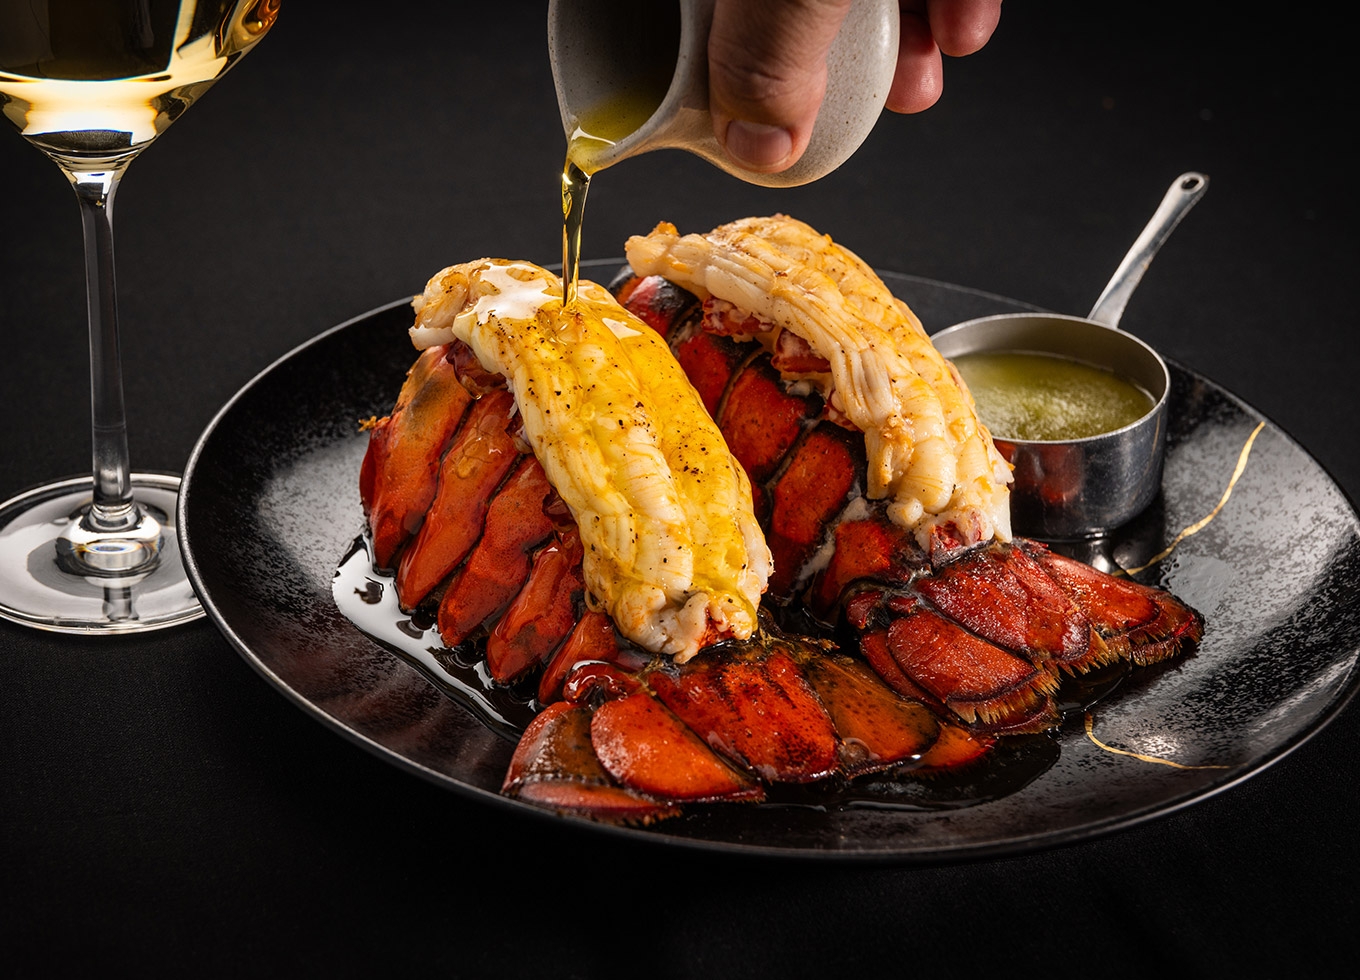 Lobster on a plate, with butter